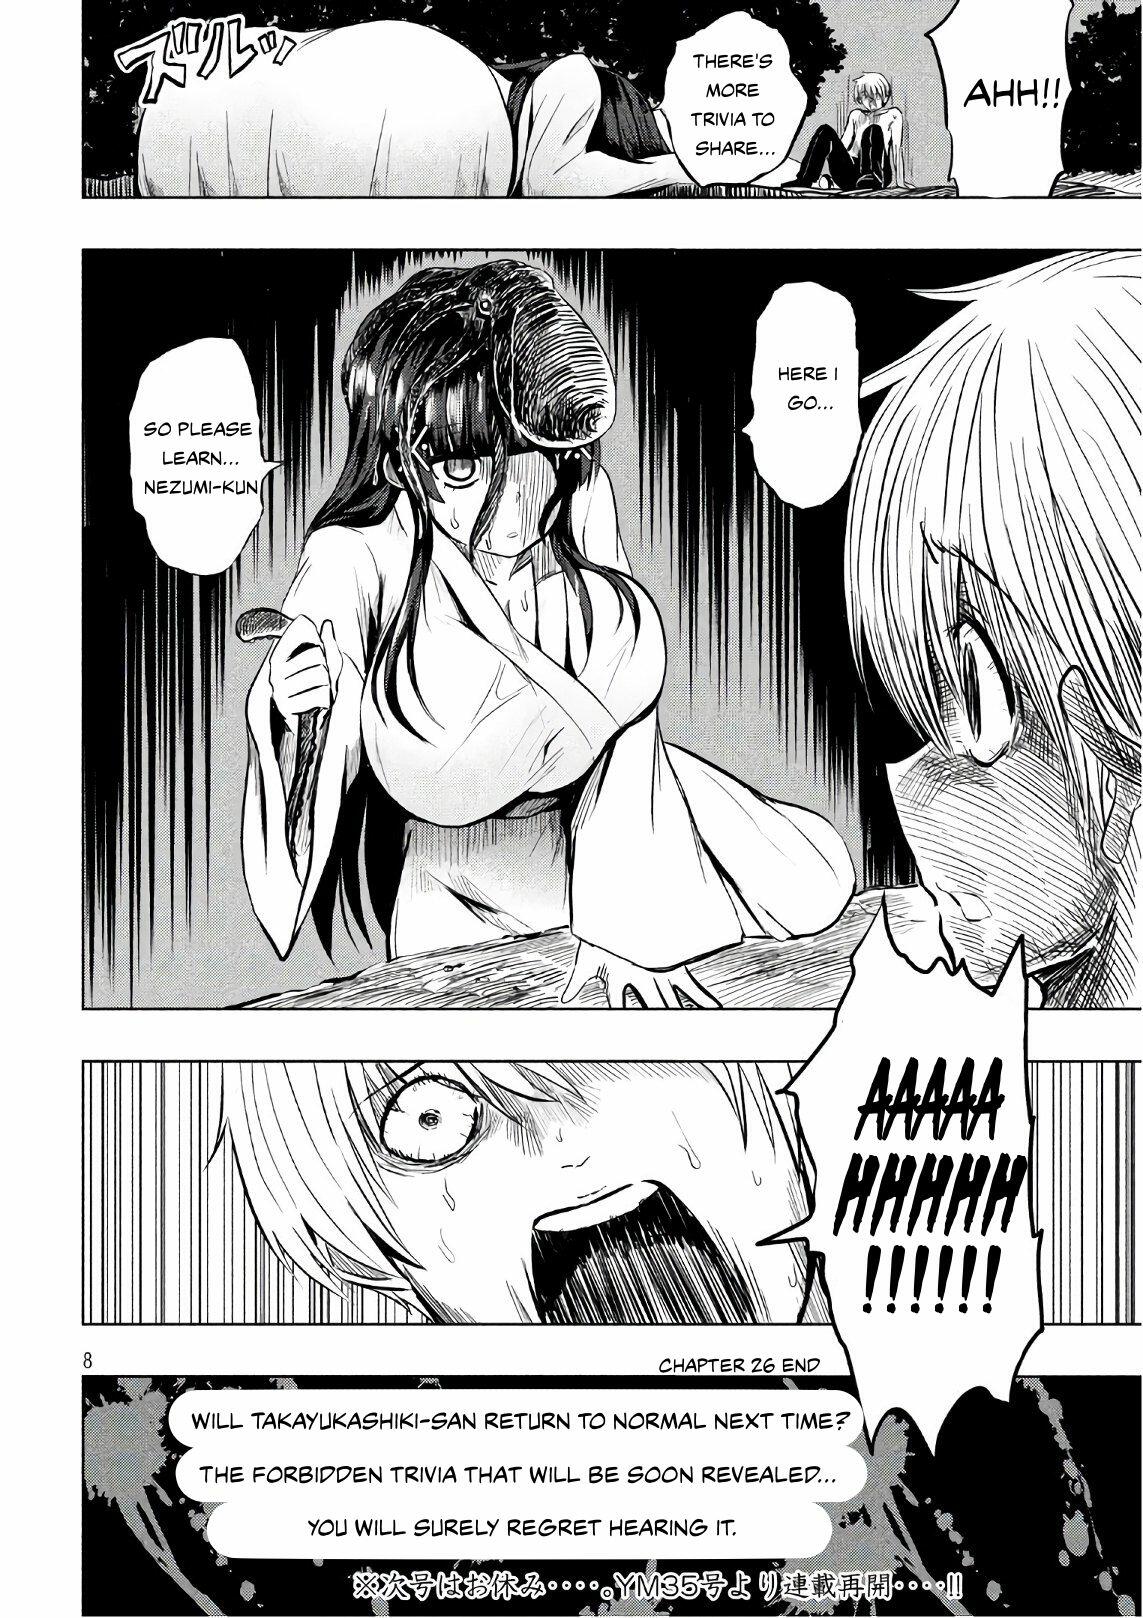 A Girl Who Is Very Well-Informed About Weird Knowledge, Takayukashiki Souko-San Chapter 26: Test Of Courage page 7 - Mangakakalots.com